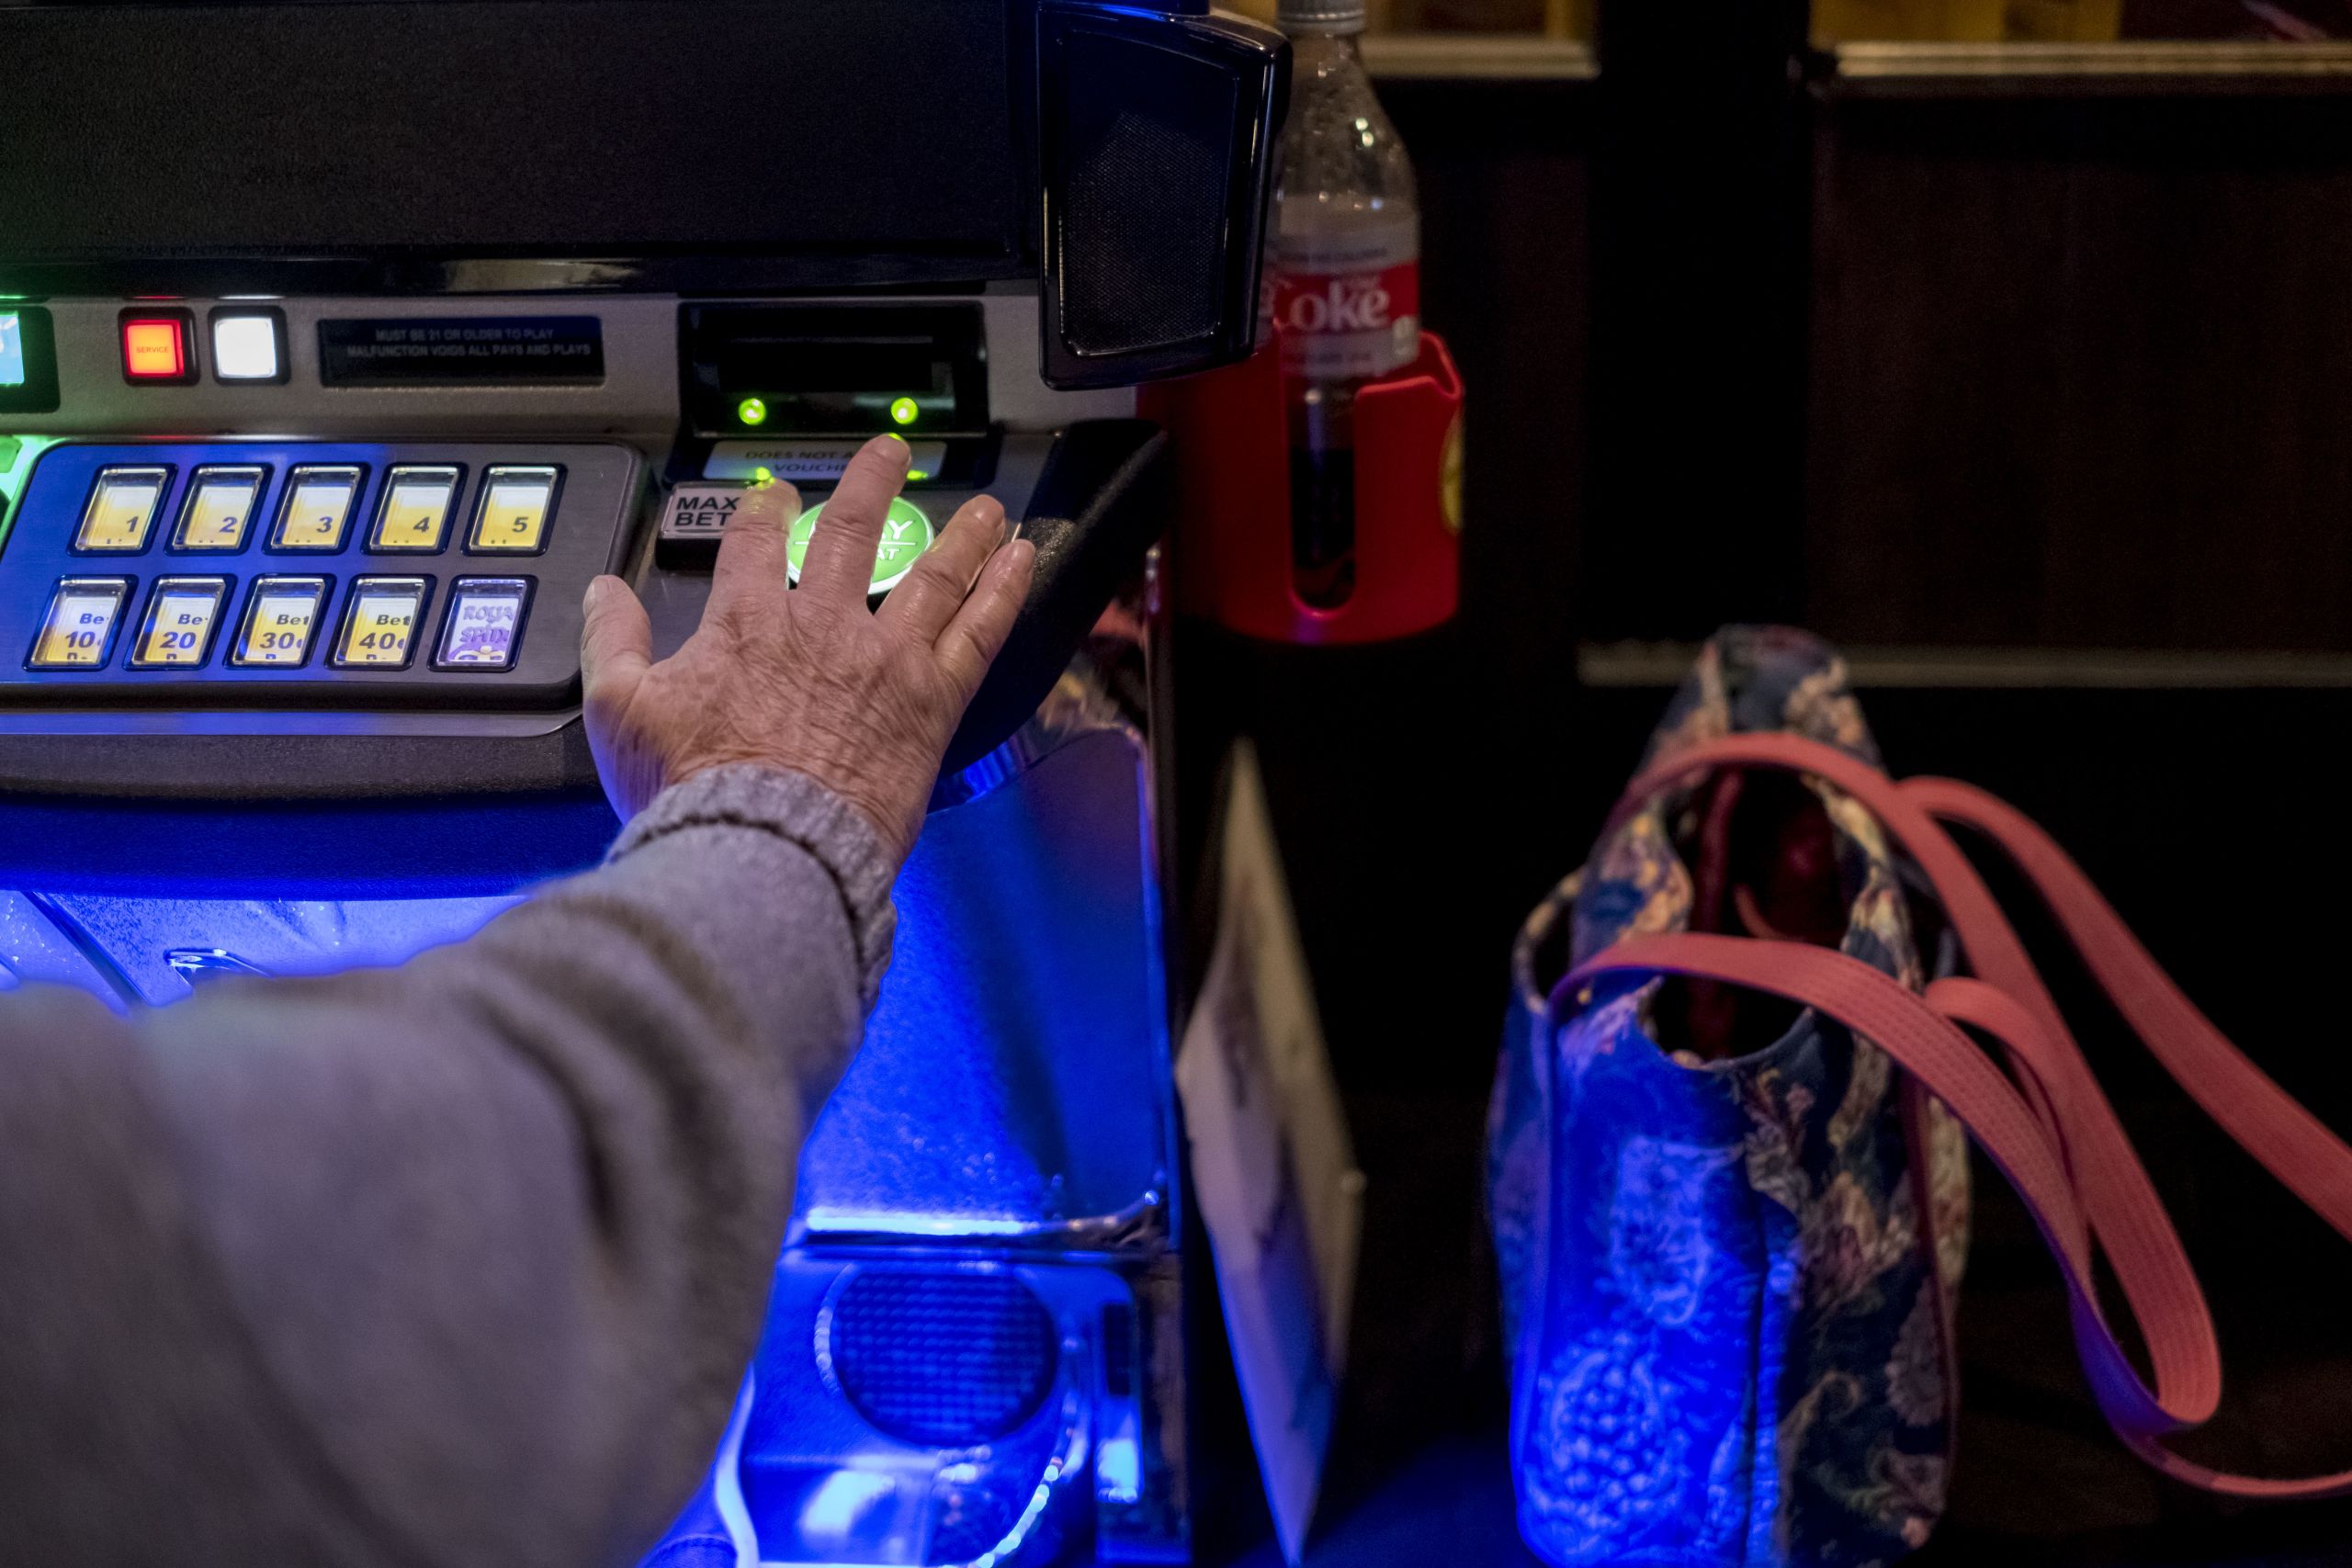 Janet Motsinger, 72, uses a video gambling machine at Sunset Inn and Suites in Clinton, Ill. (Whitney Curtis, special to ProPublica Illinois)